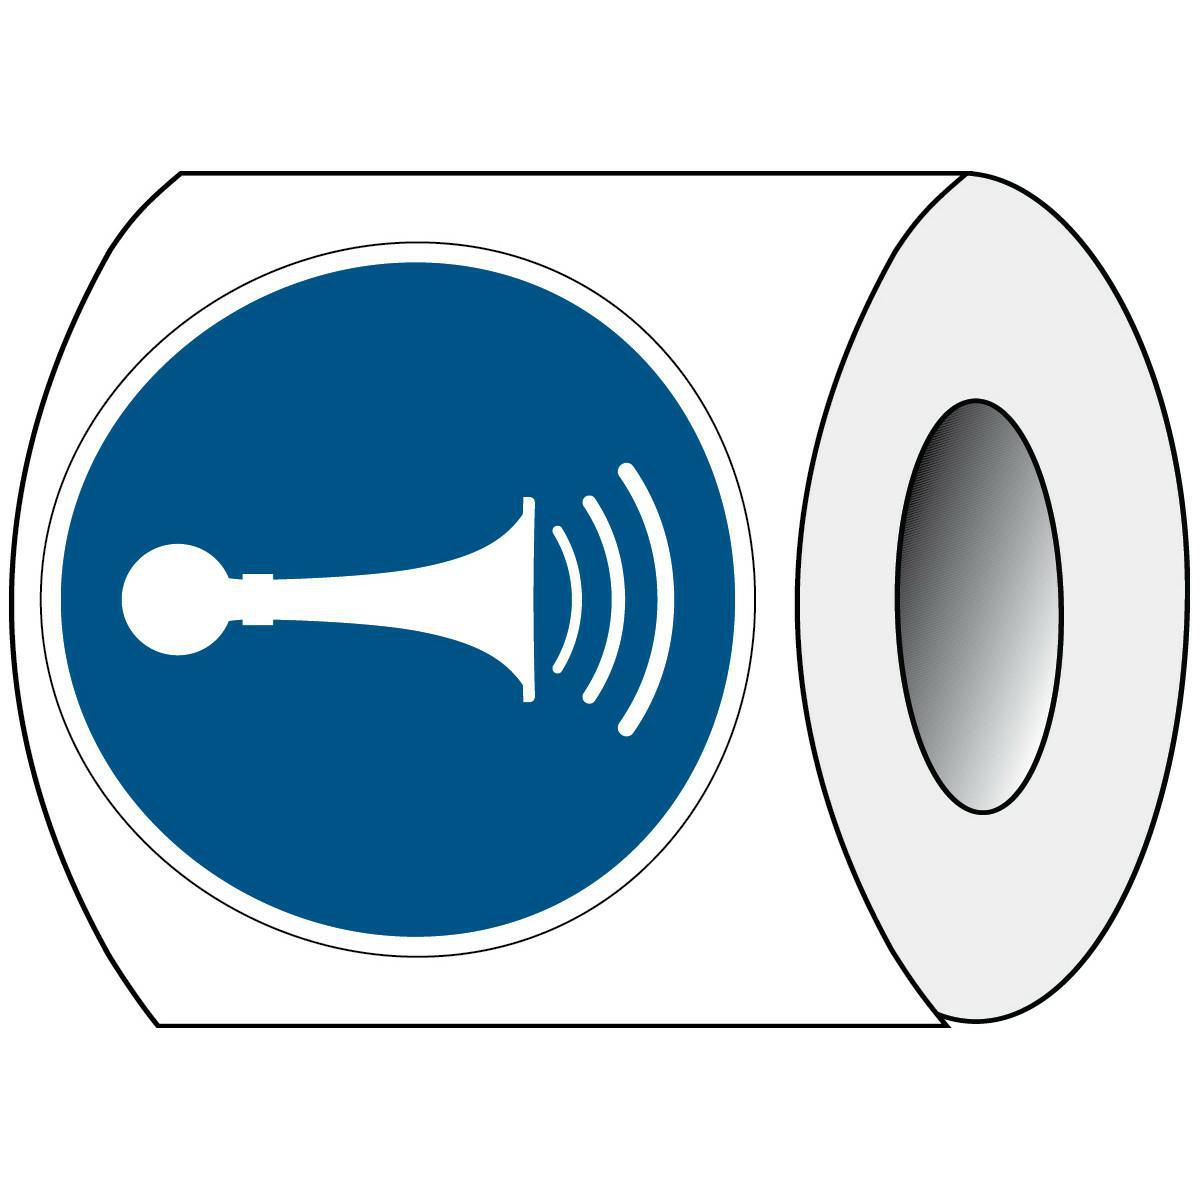 Brady PIC M029-DIA 025-PE-ROLL1 W128401851 ISO Safety Sign - Sound horn 